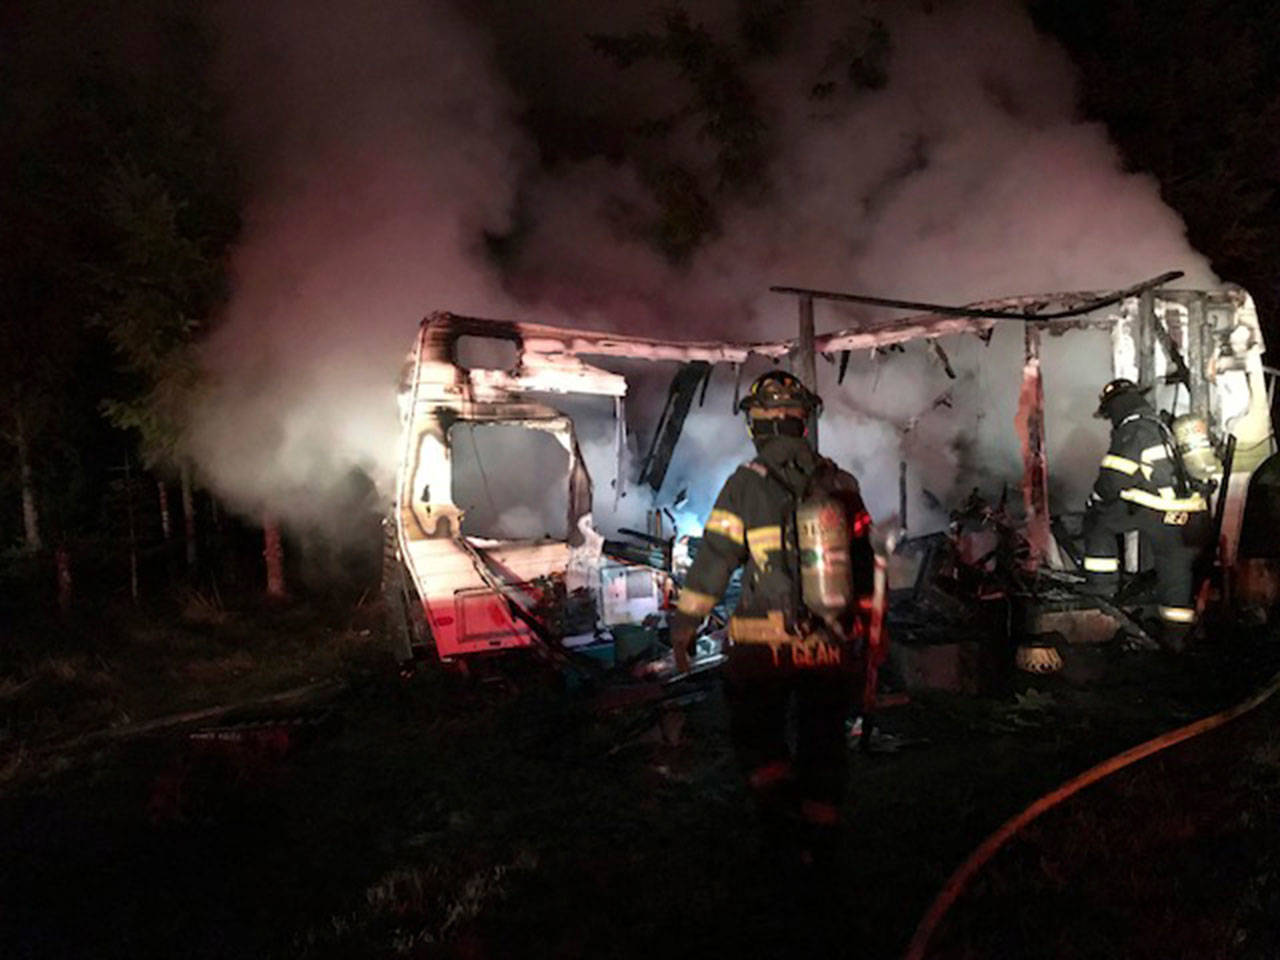 Fire destroyed this travel trailer on Deer Park Road. (Clallam County Fire District No. 2)